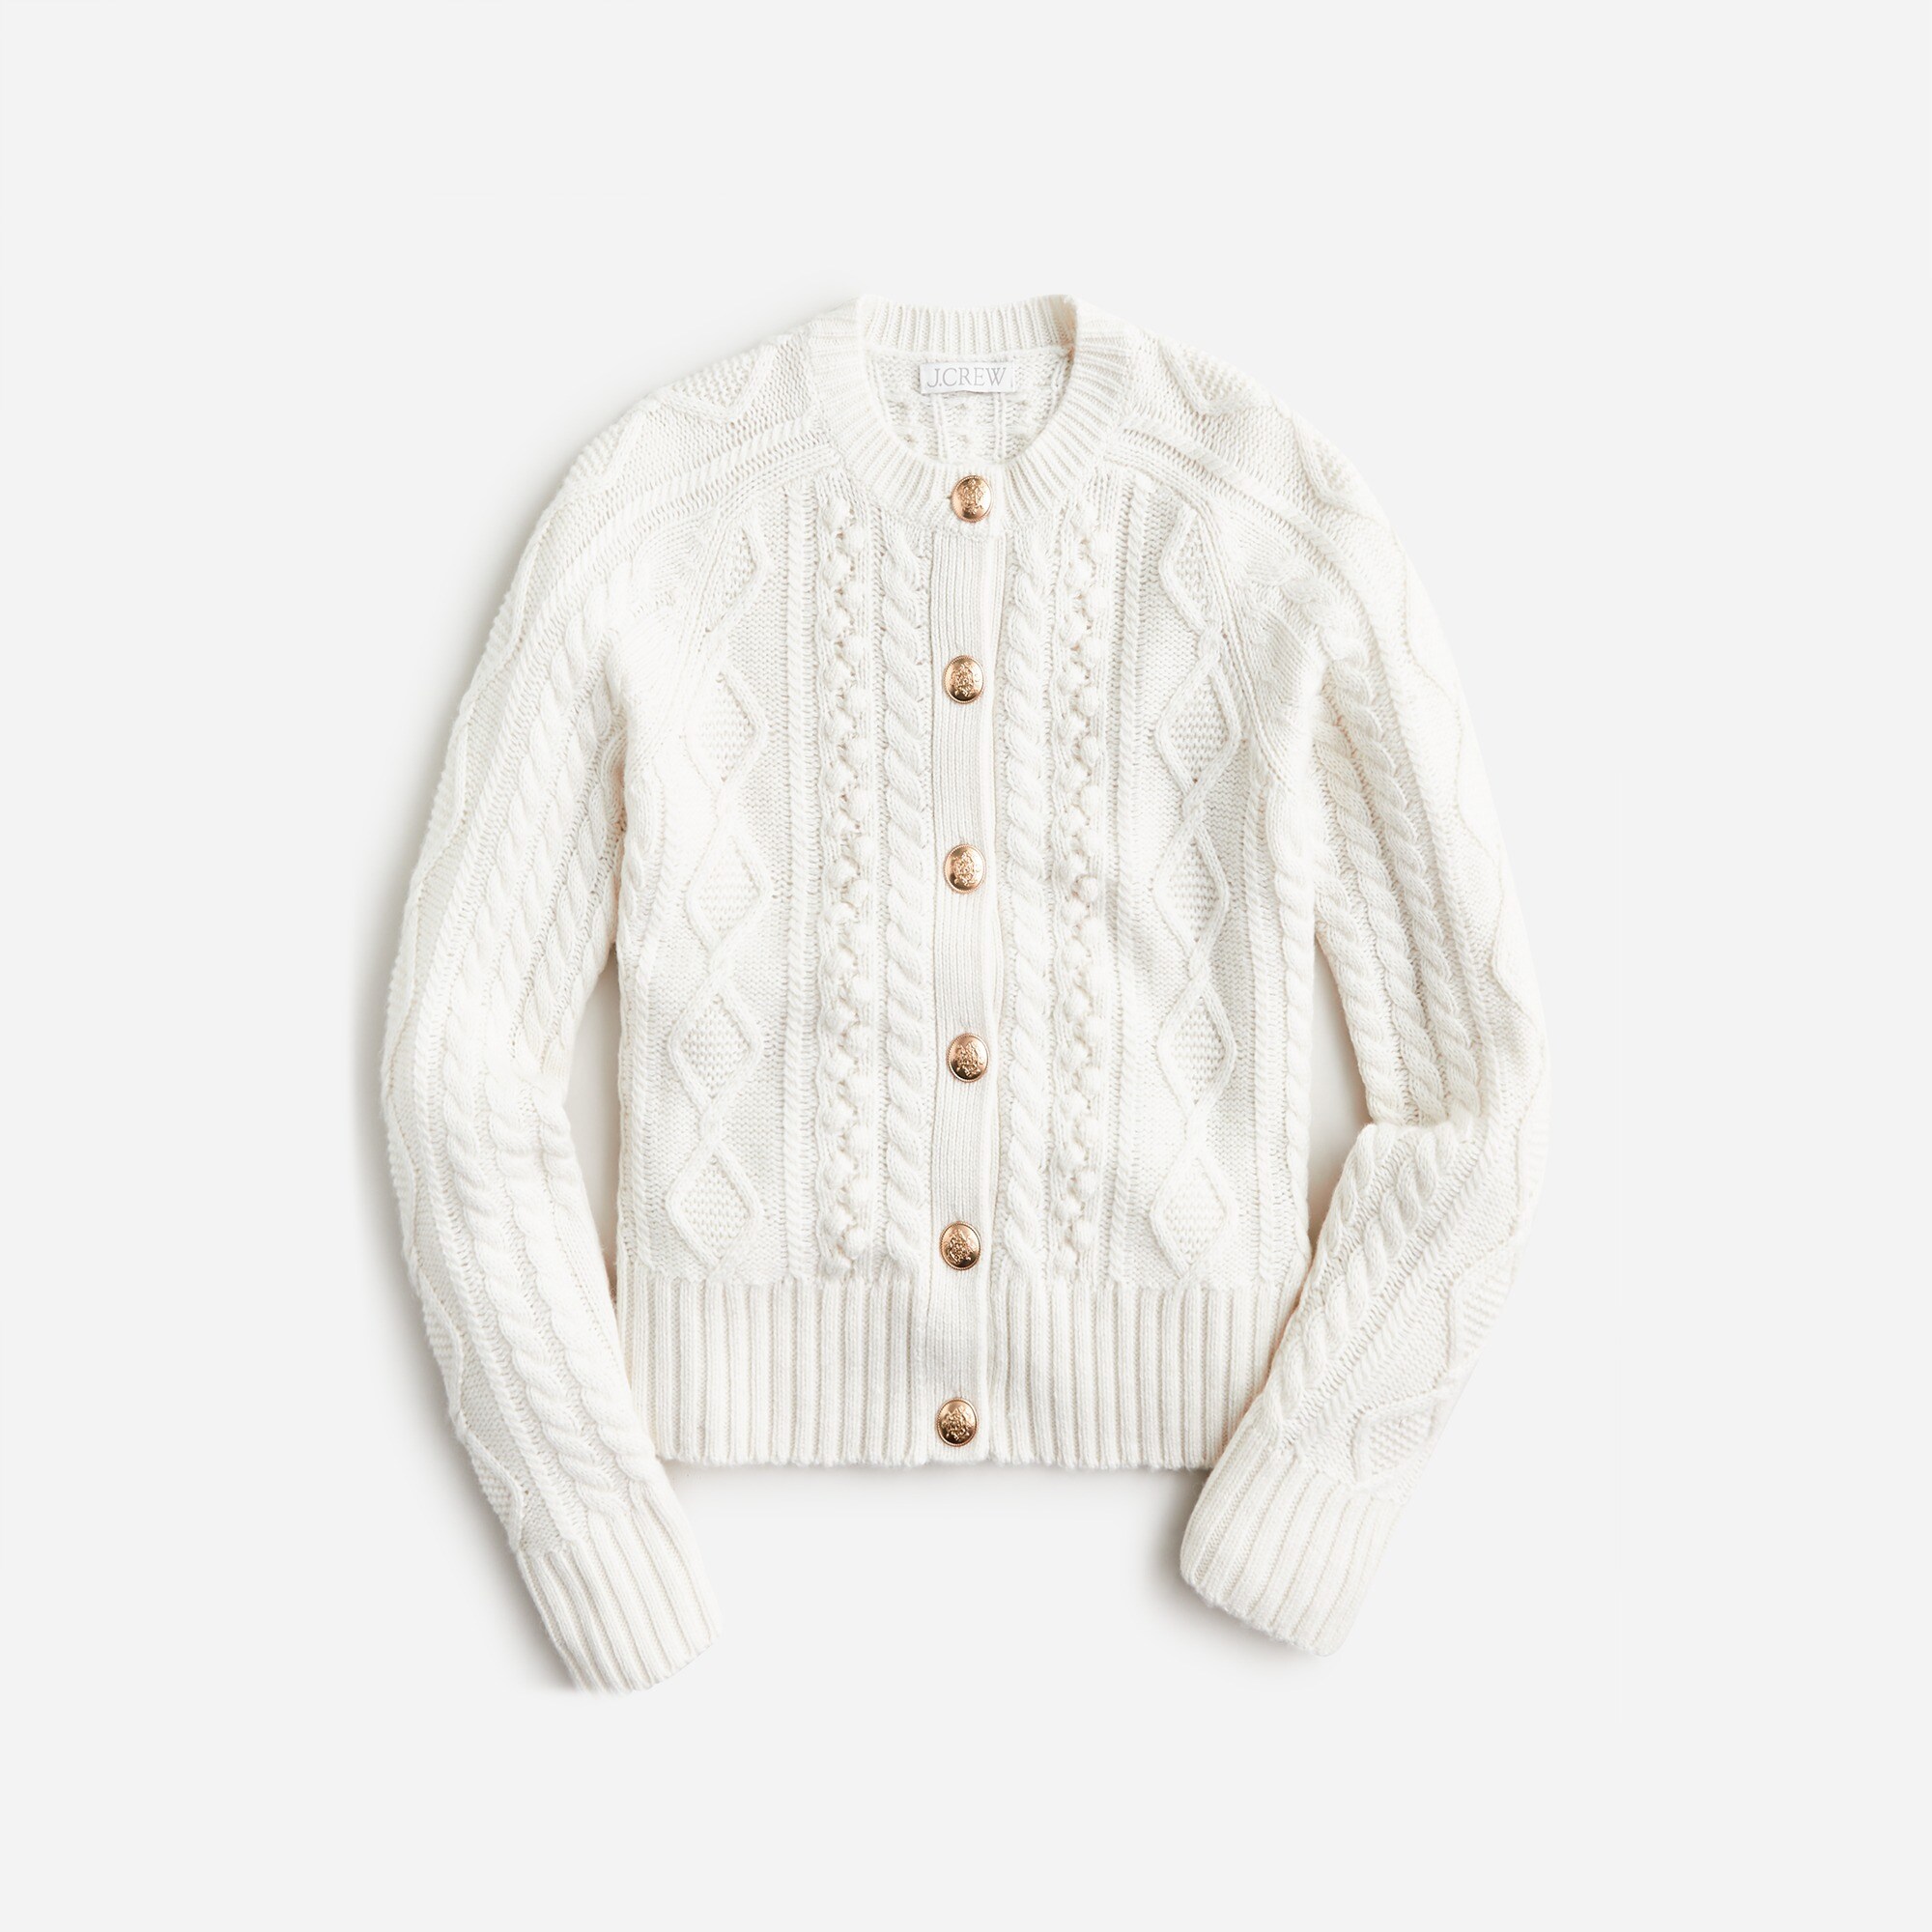  Cable-knit cardigan sweater